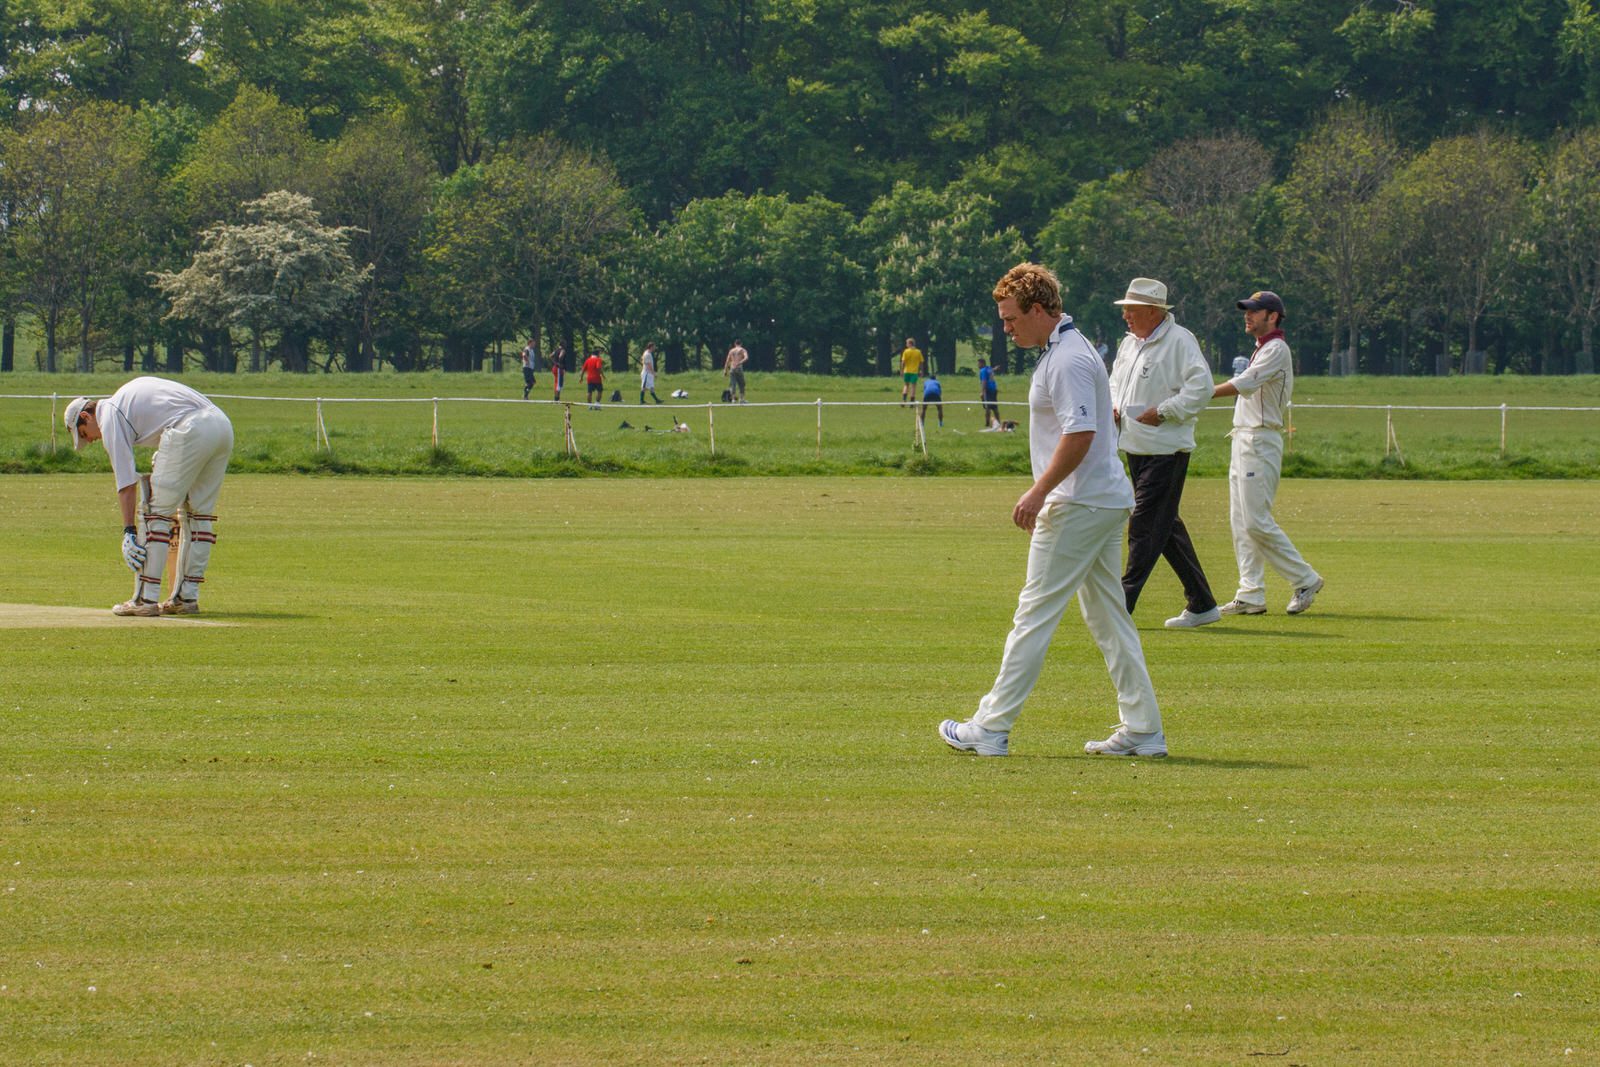 TWO CRICKET CLUBS IN PHOENIX PARK NEAR THE WELLINGTON MONUMENT 017